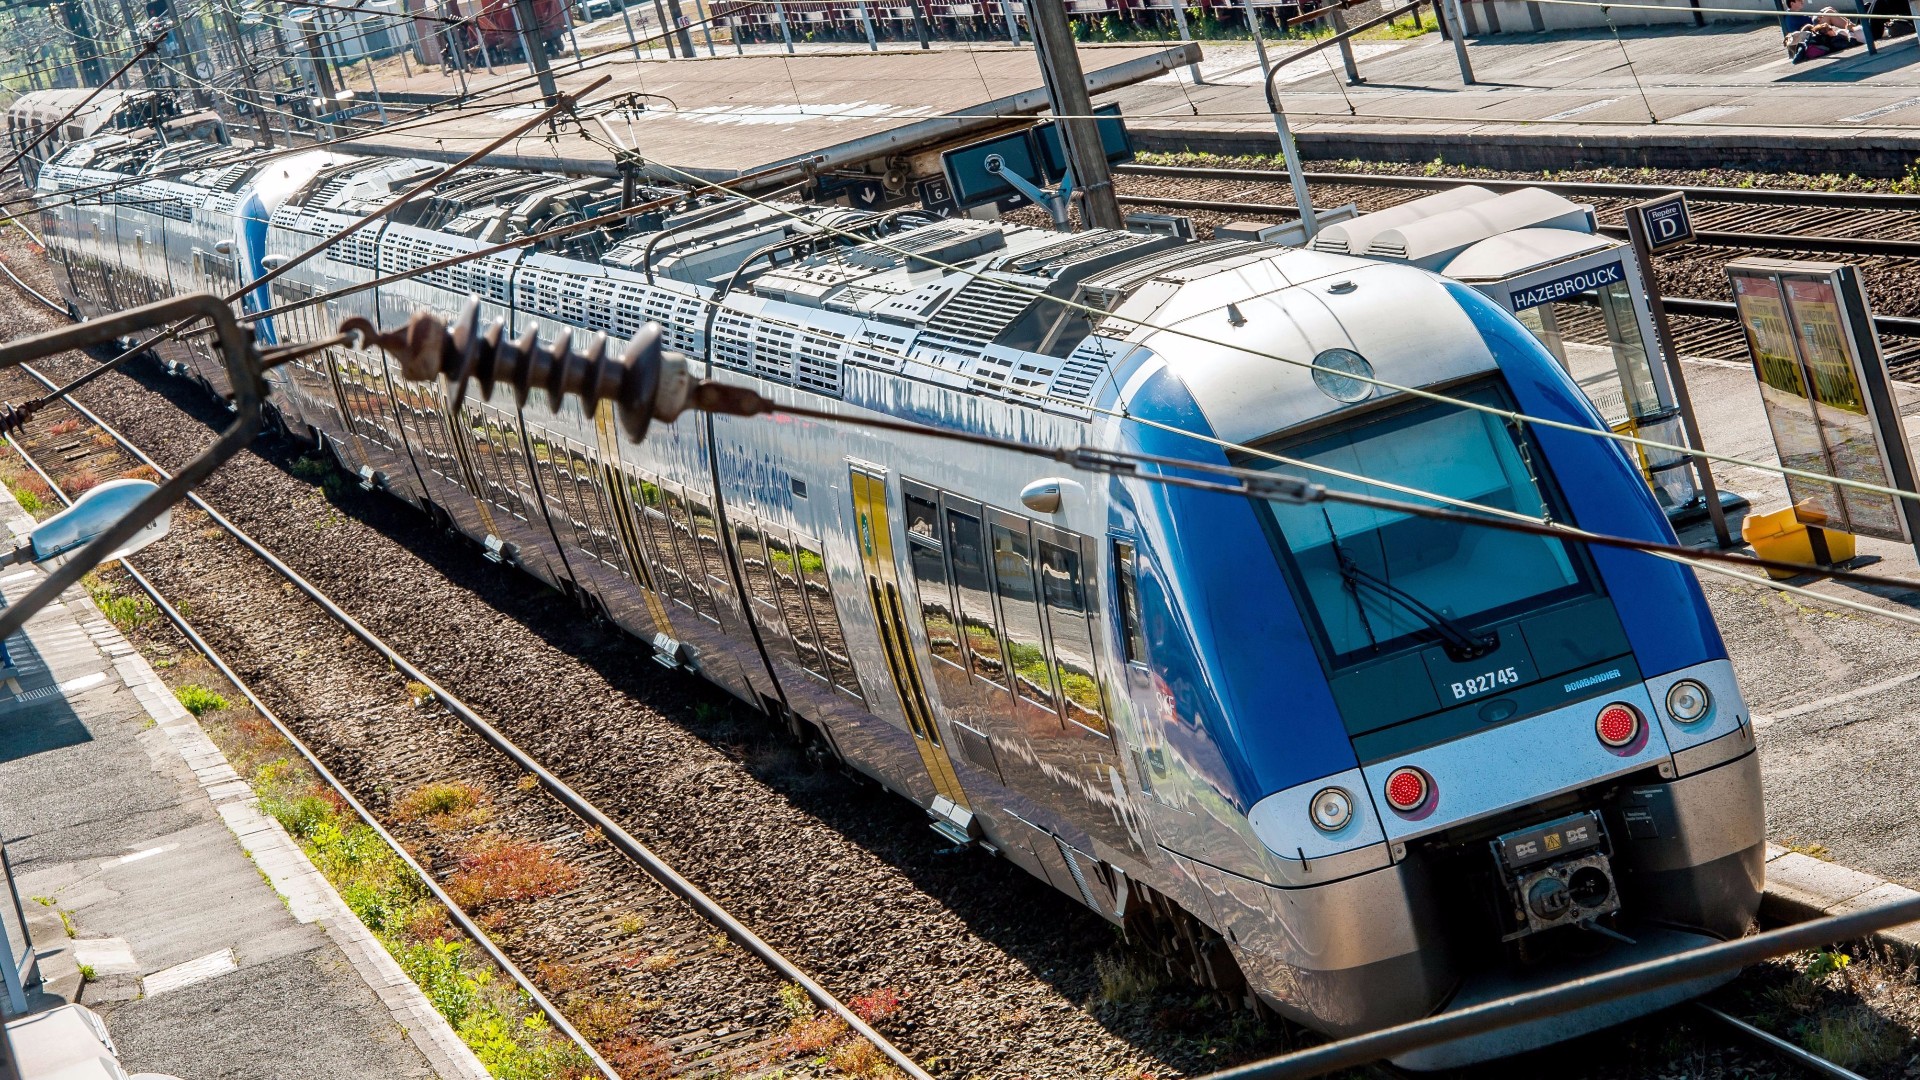 Train Express Regional Trains In France All Trains Best Price Happyrail